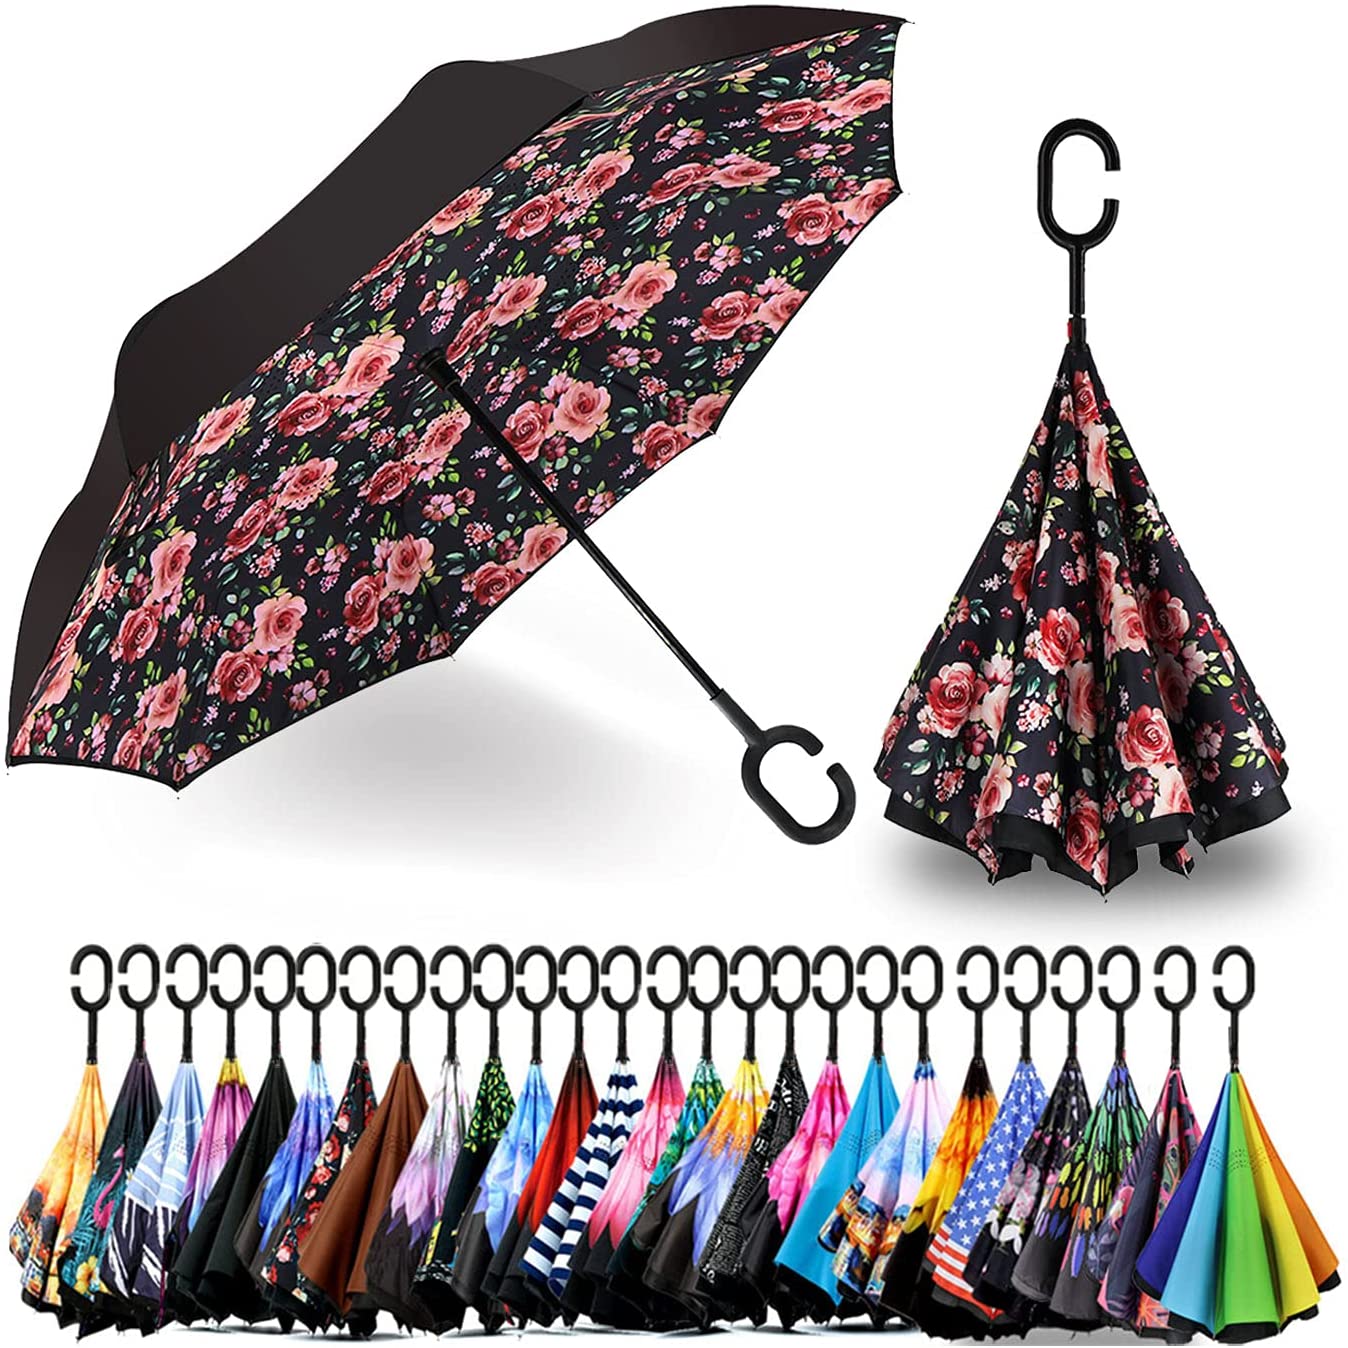 Spar Anti-UV Waterproof Windproof Straight Umbrella for Car Rain Outdoor Use Saa Double Layer Inverted Umbrella with C-Shaped Handle 